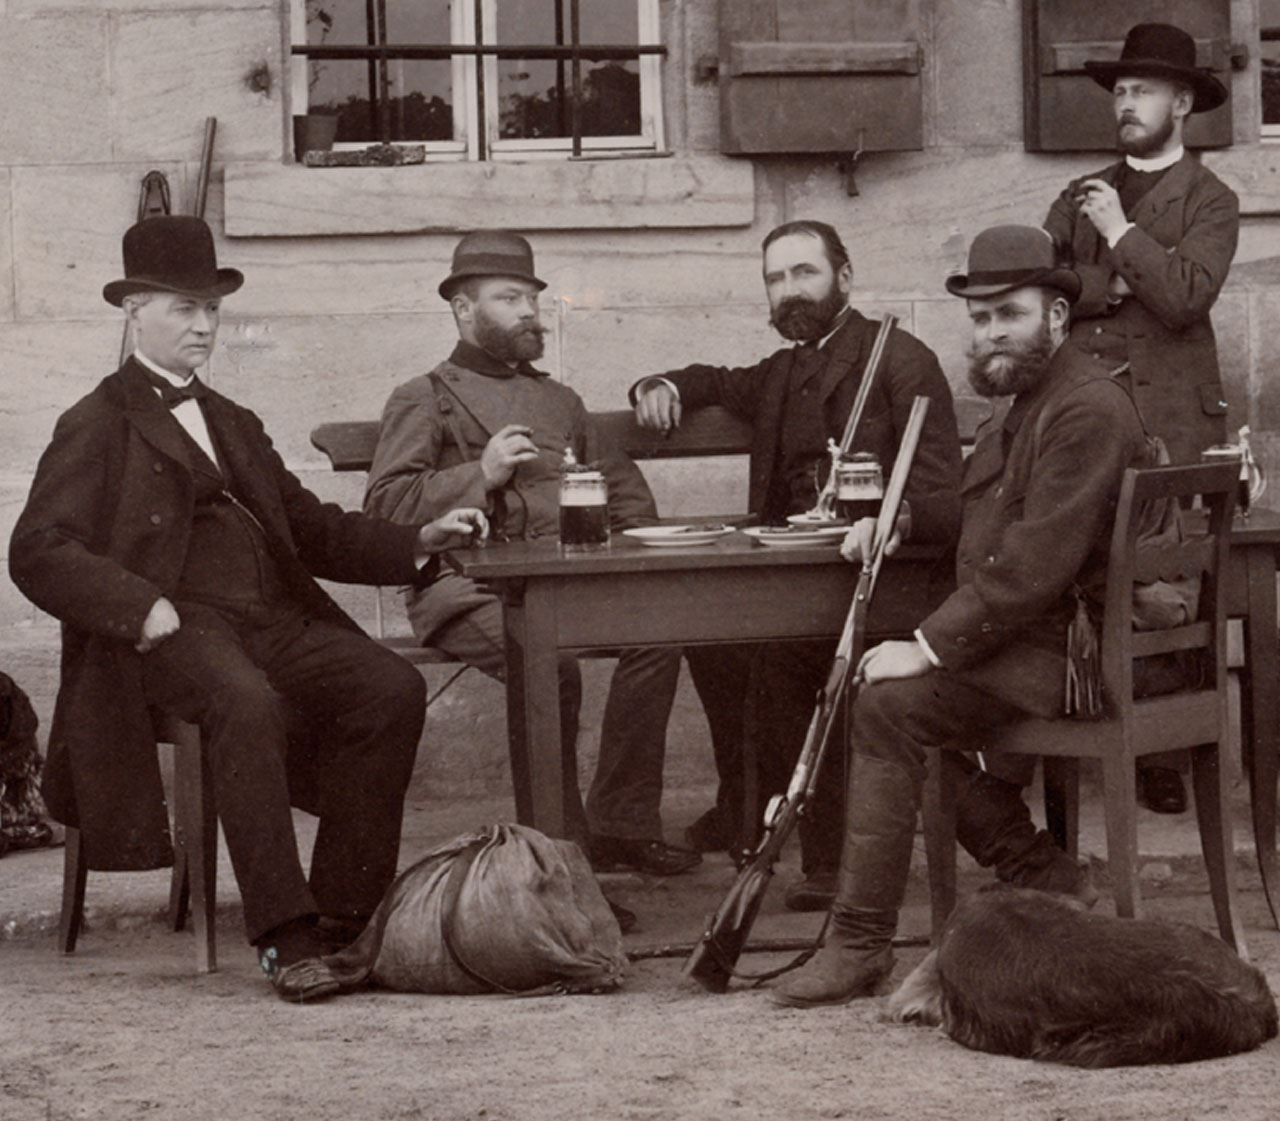 In a hunting party: Lothar (far left) and Wilhelm von Faber 2nd f. right)